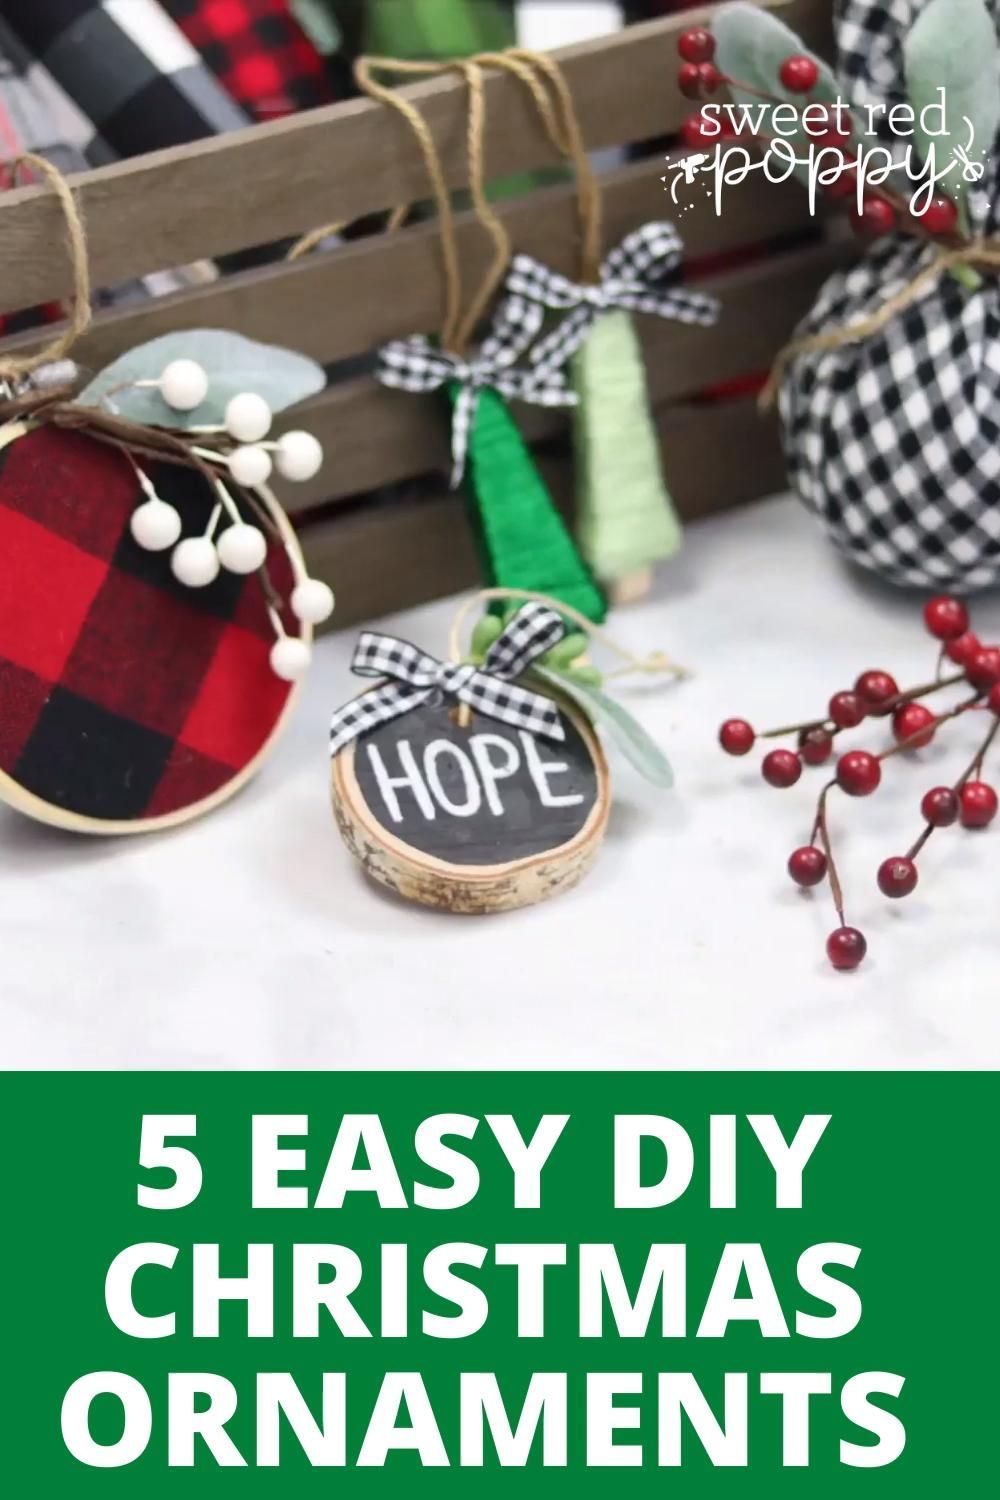 Easy Ways to Decorate Ornaments for Christmas - Sweet Red Poppy -   25 diy Christmas videos ideas